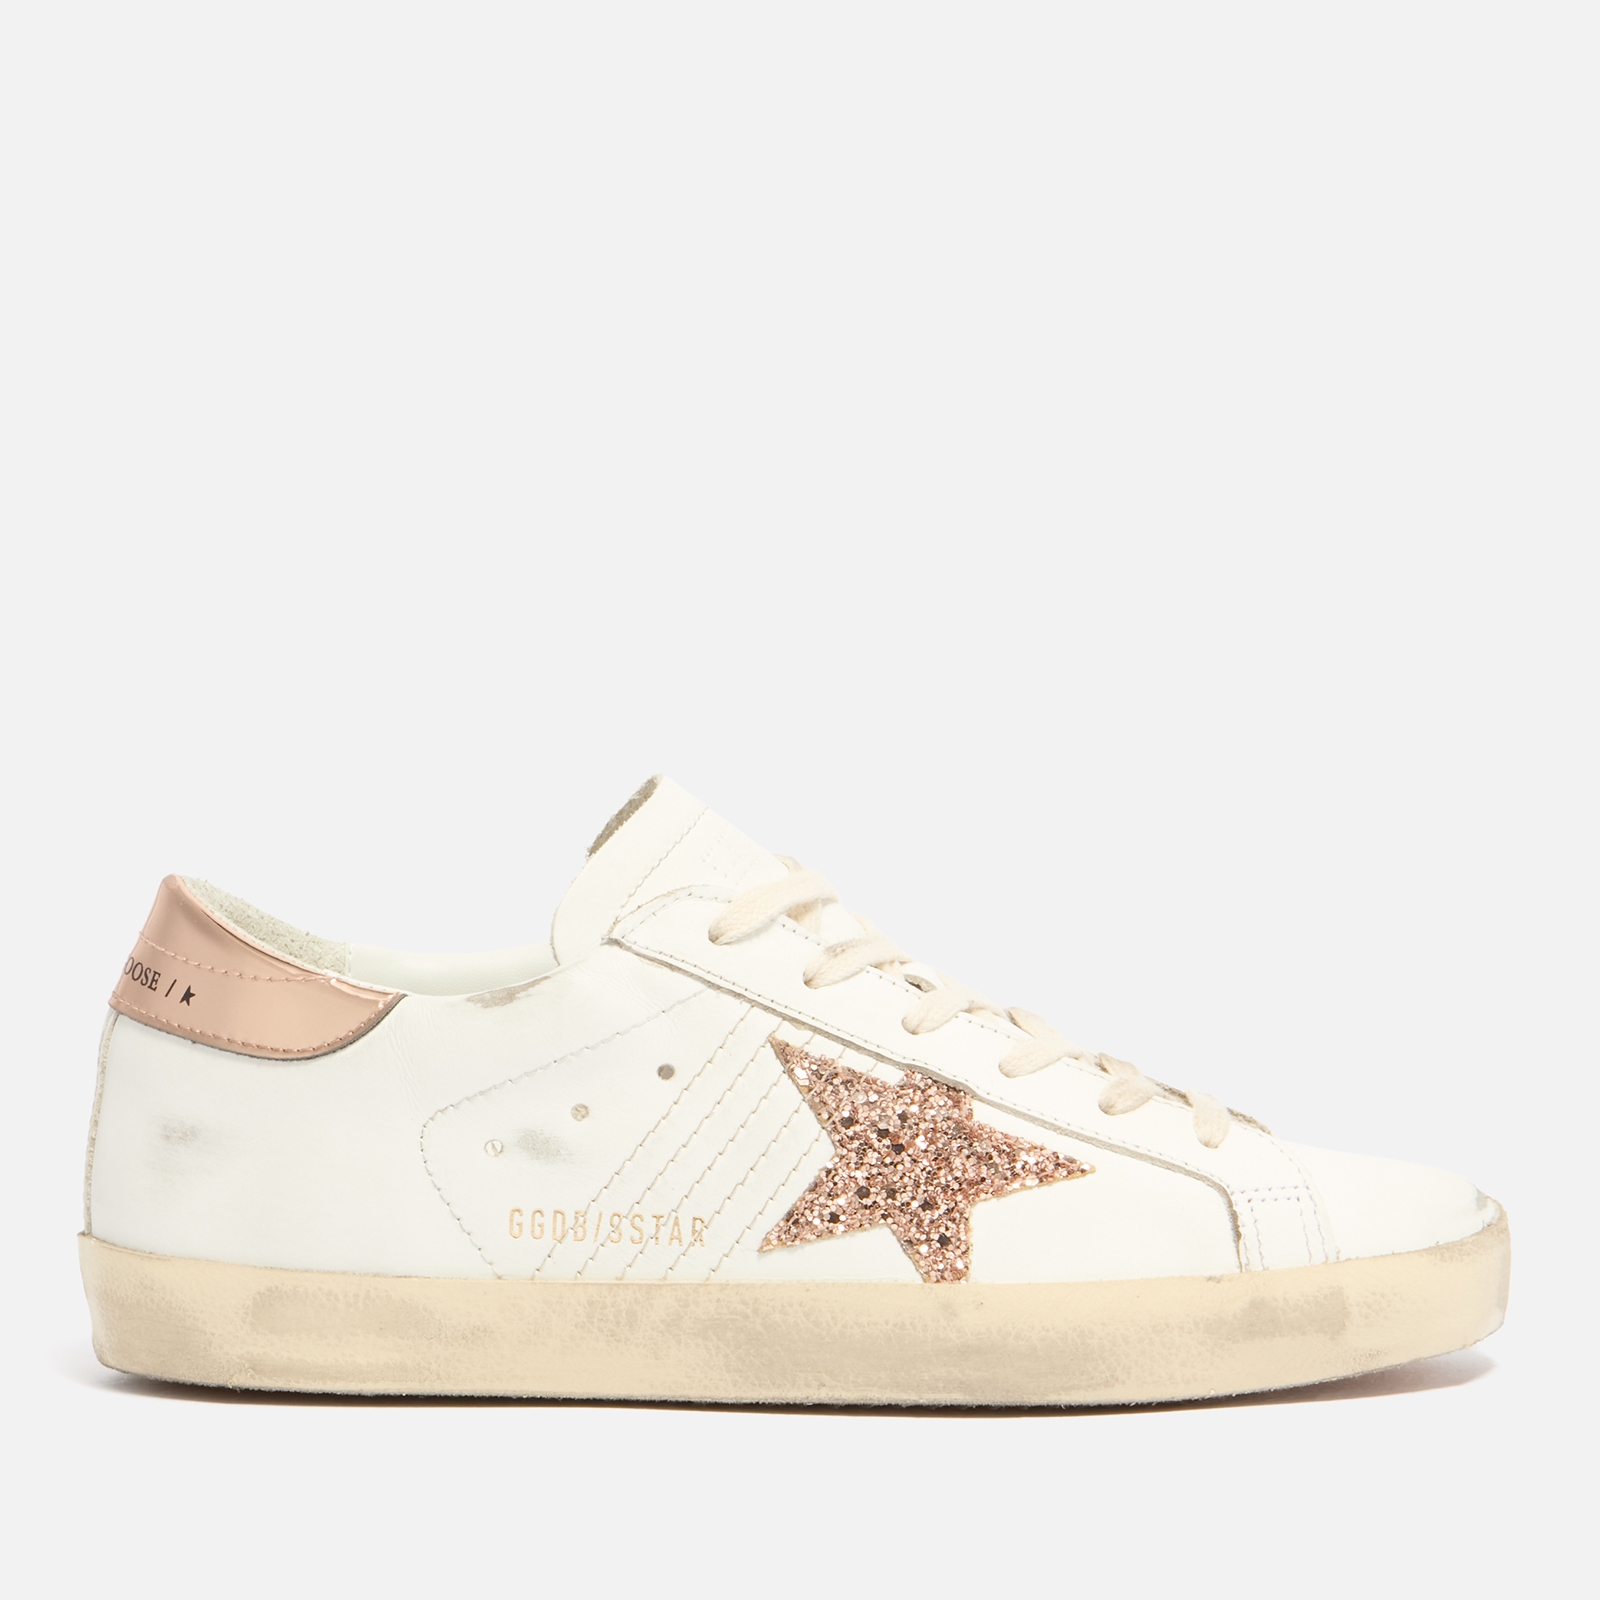 Golden Goose Women's Superstar Distressed Leather Trainers - UK 7